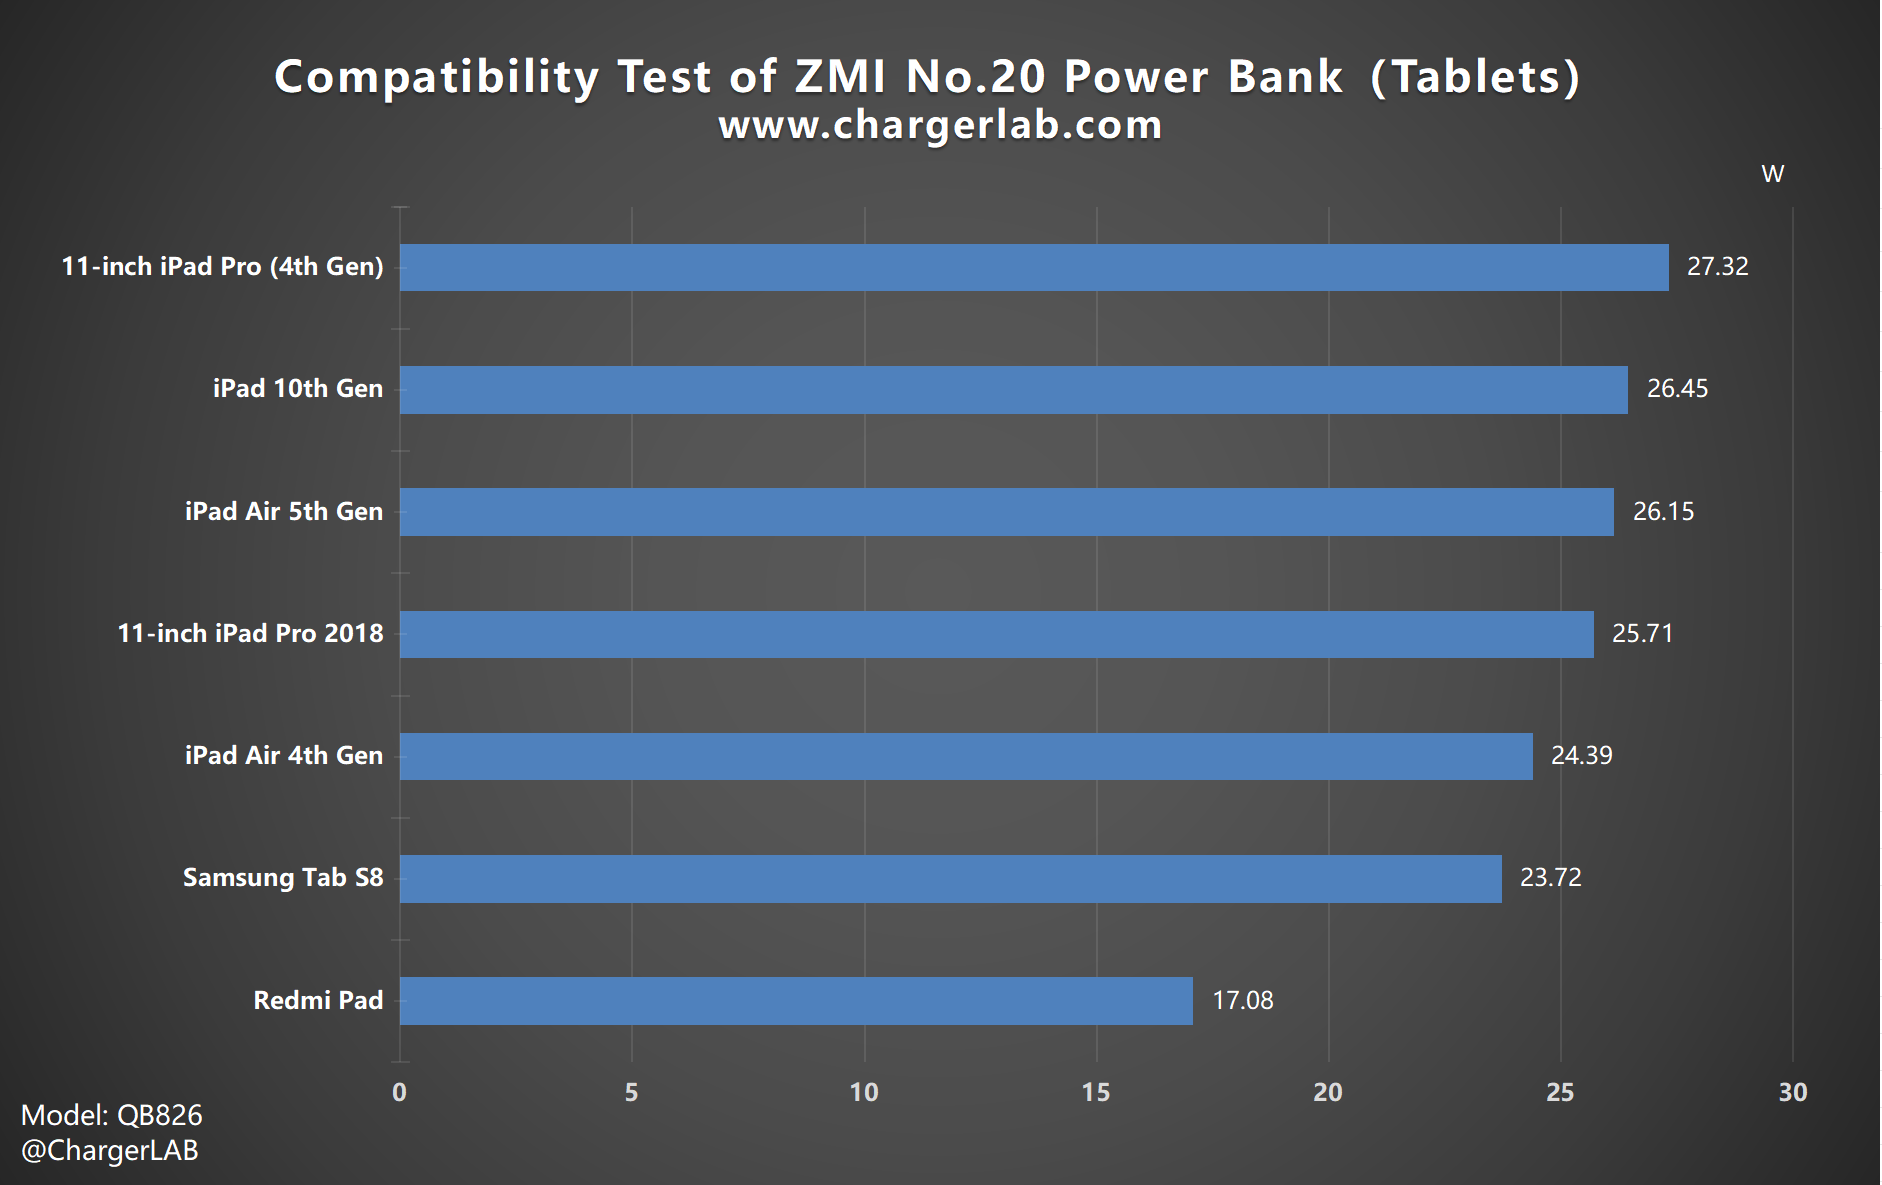 Xiaomi's Perfect Companion | ZMI PowerPack No.20 Power Bank ChargerLAB Compatibility 100-Chargerlab